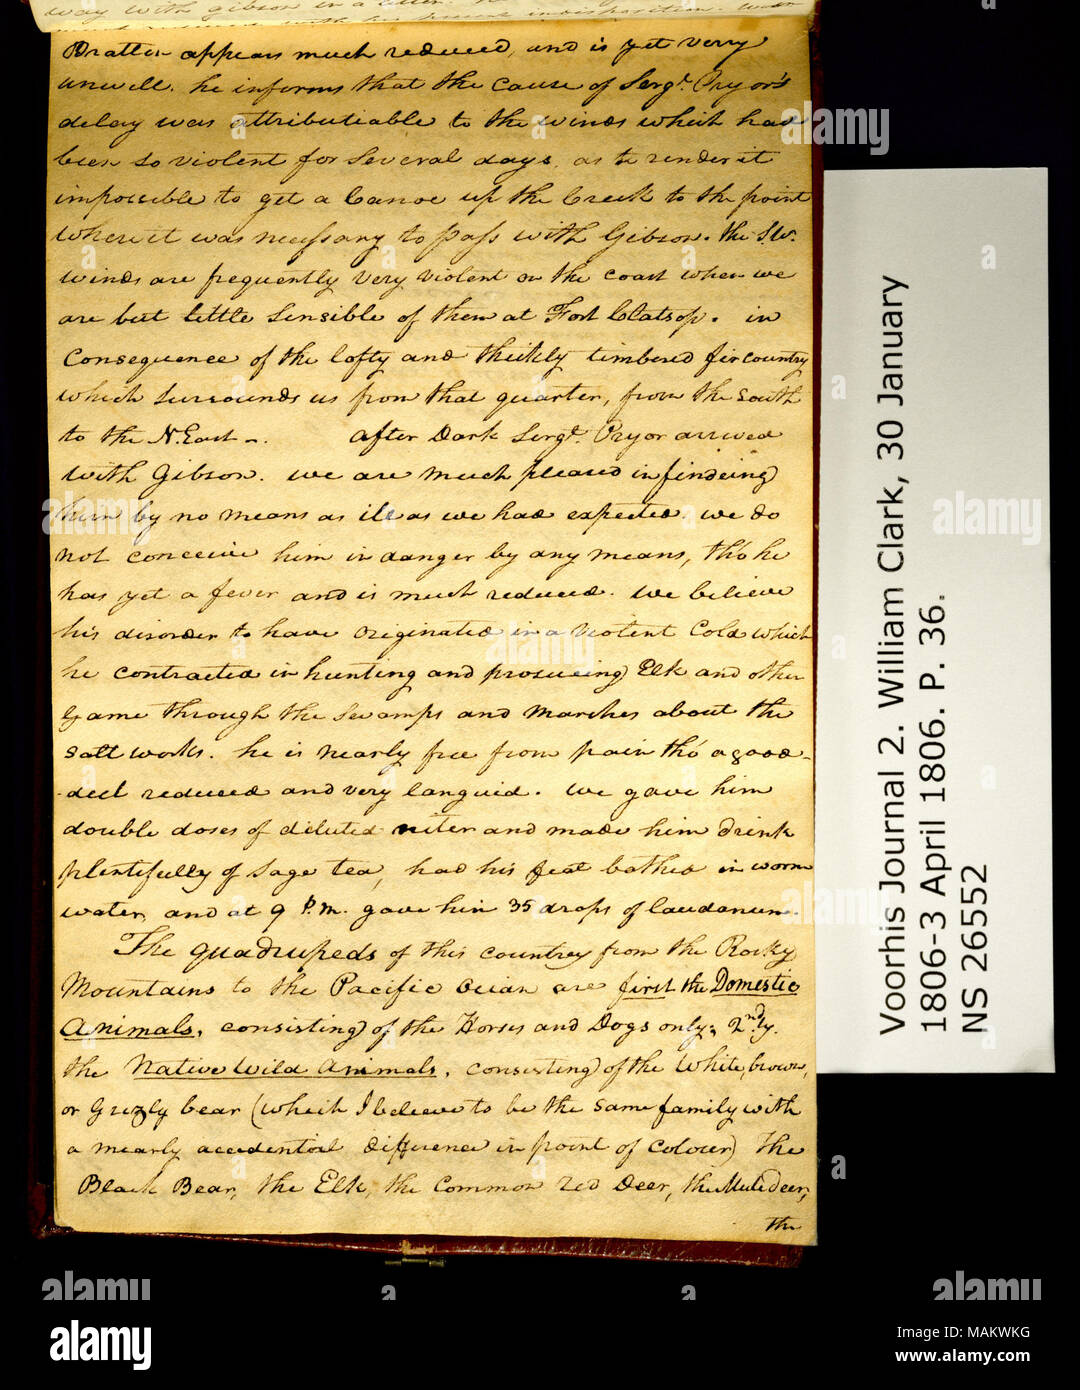 'Bratten [William Bratton] appears much reduced, and is yet verry unwell. . .' Title: Clark Family Collection: Volume 2. Voorhis Journal No. 2, page 36, February 15, 1806  . 15 February 1806. Clark, William, 1770-1838 Stock Photo